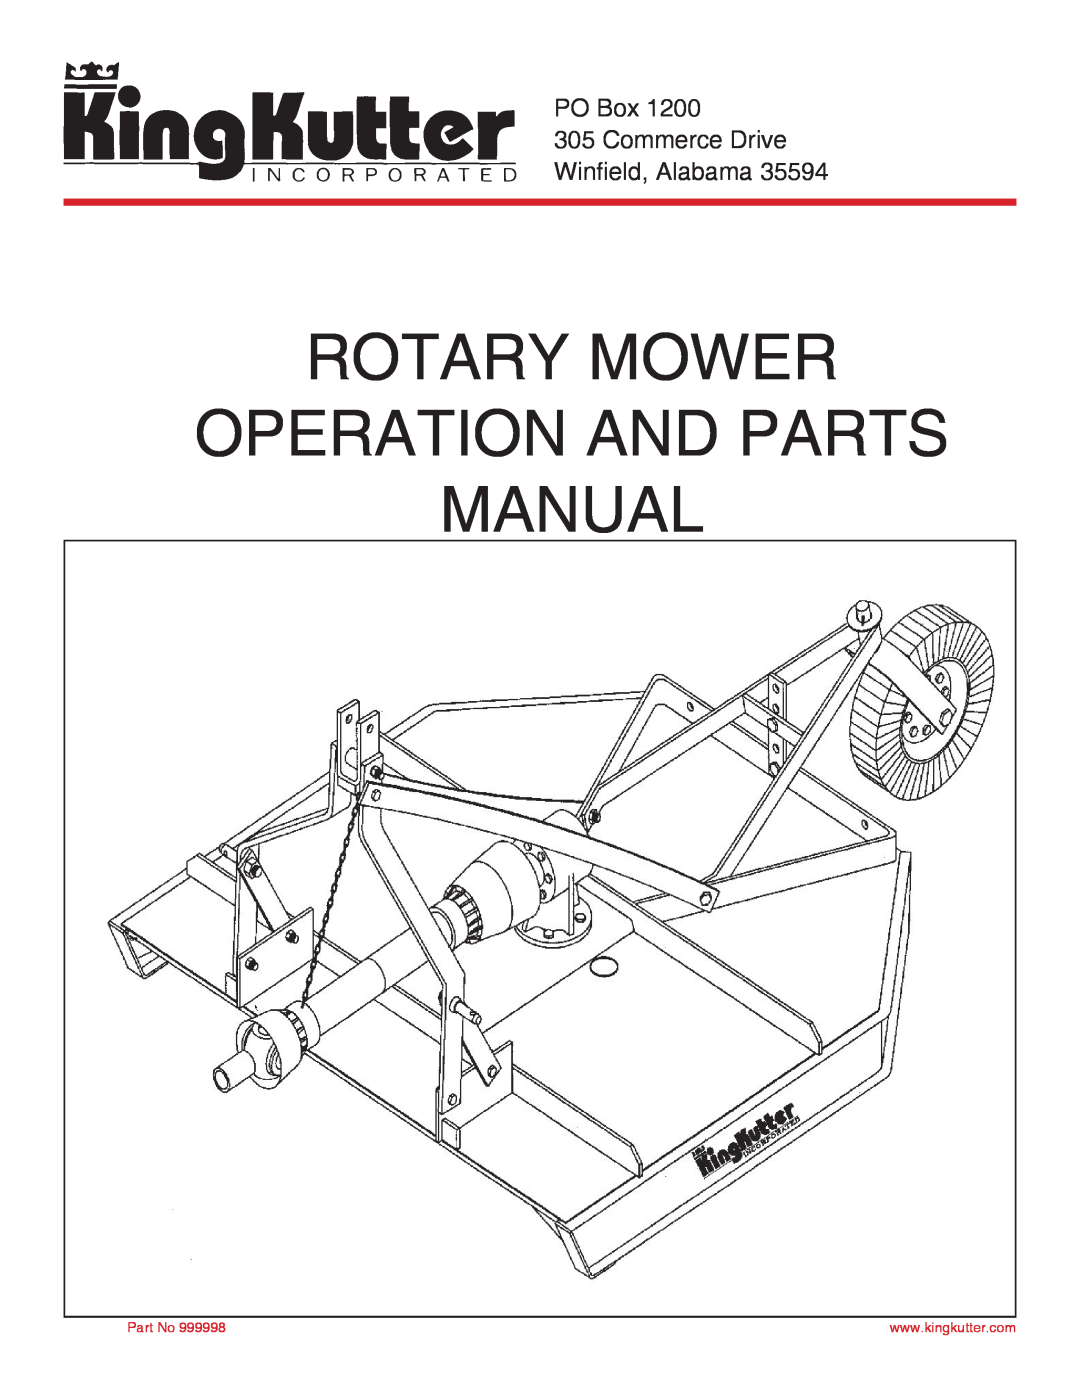 King Kutter manual Rotary Mower Operation And Parts Manual, PO Box 305 Commerce Drive Winfield, Alabama 